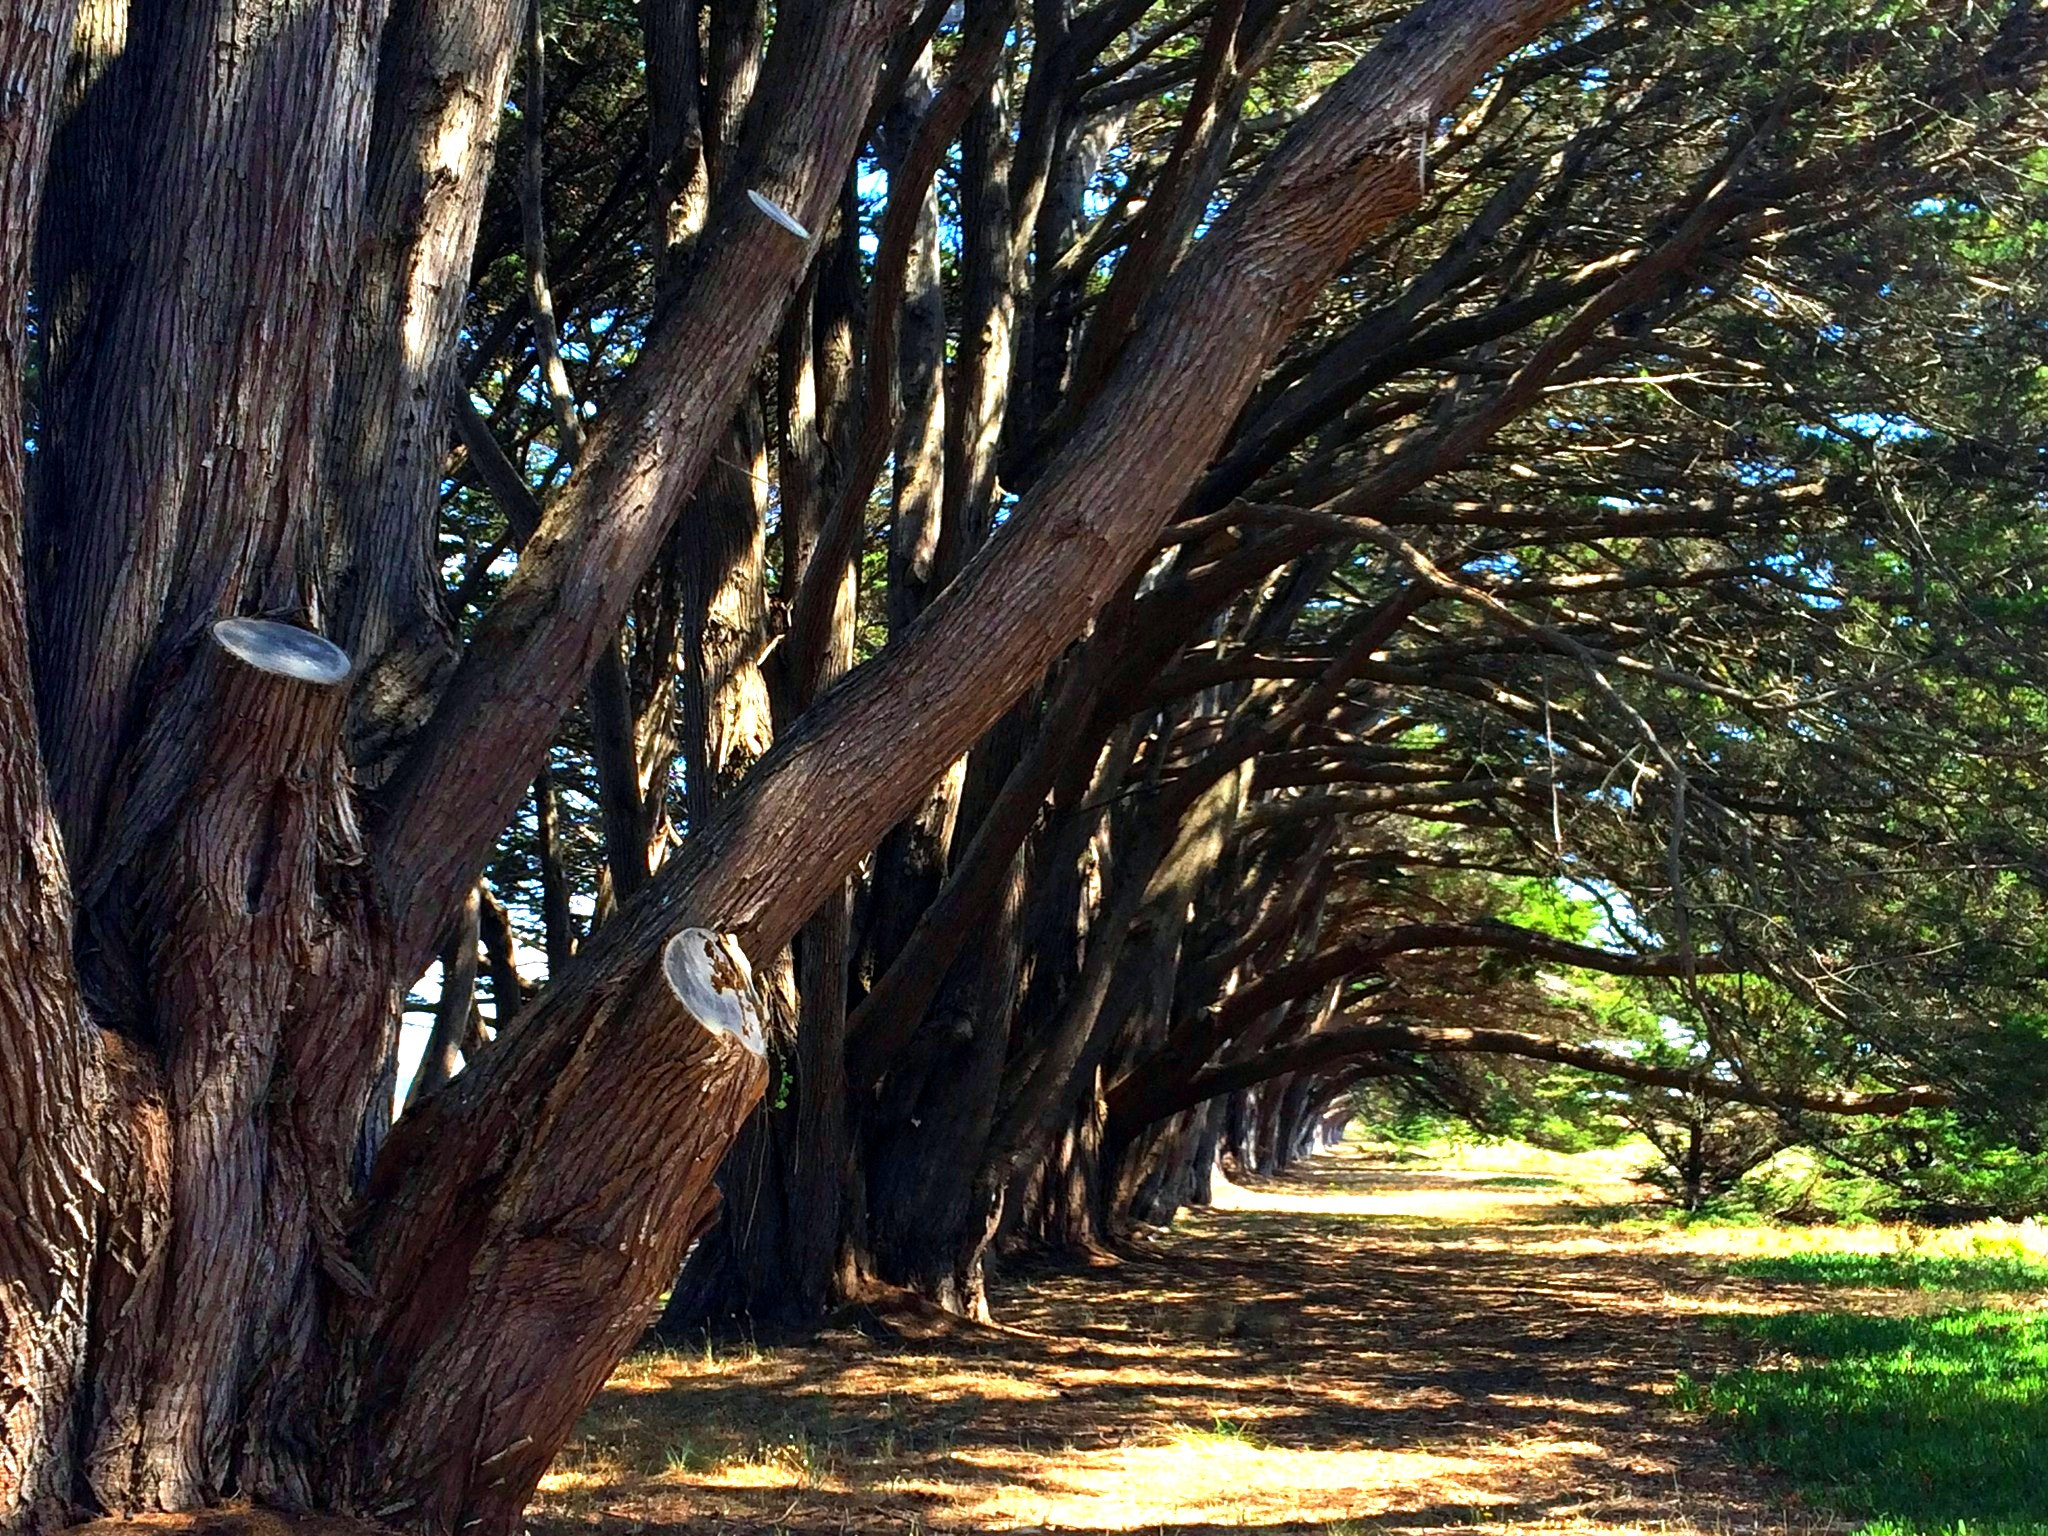 Jag.gr 645 PRO Mk III for Apple iPhone 5s sample photo. Cypress tree tunnel photography